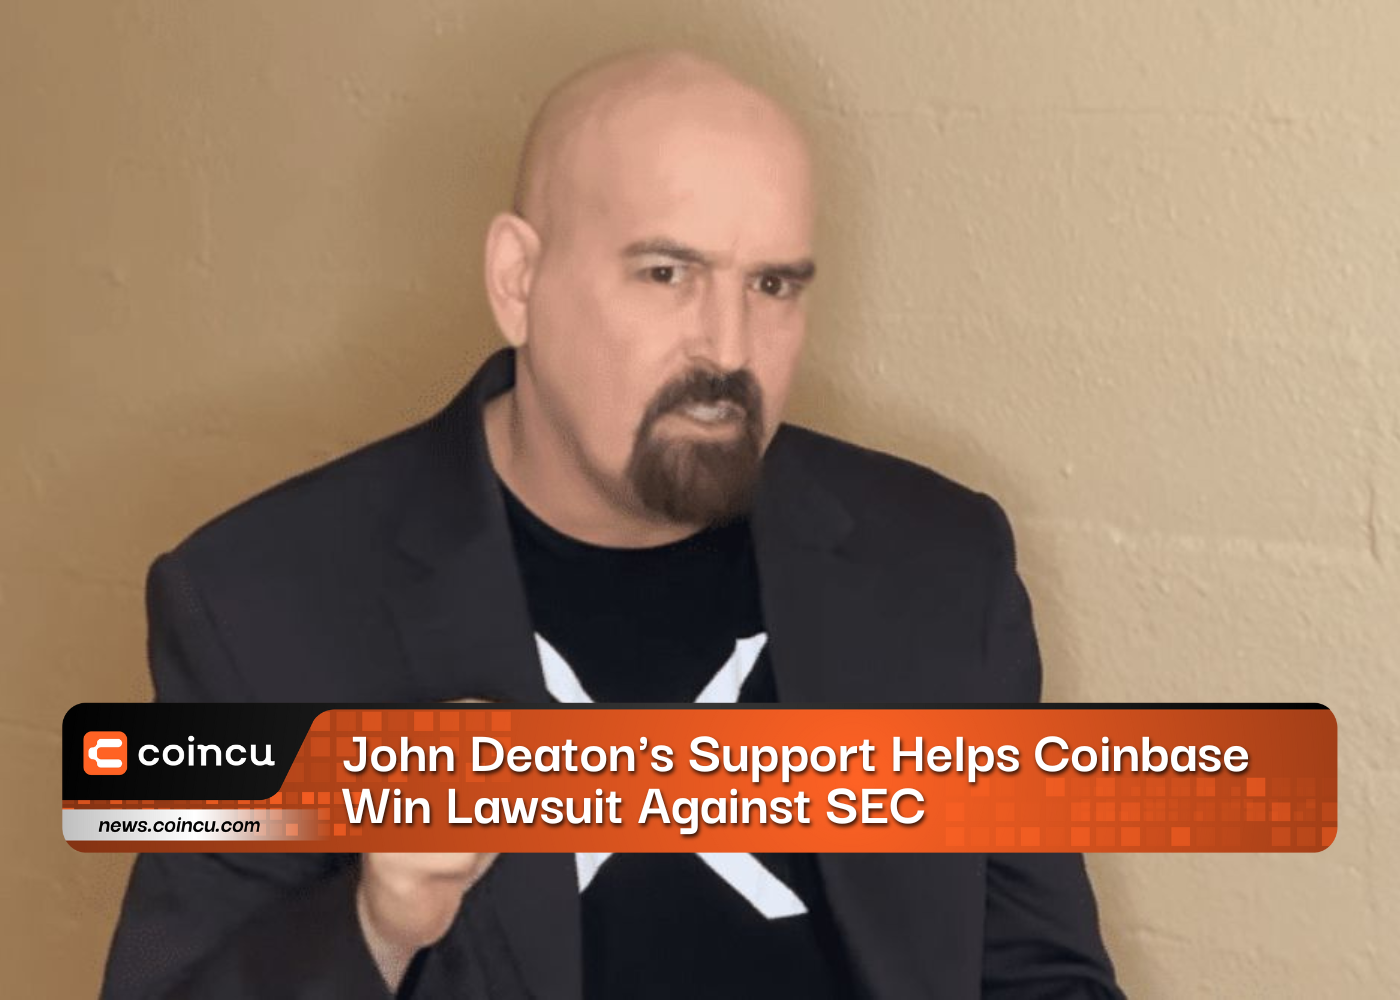 John Deatons Support Helps Coinbase